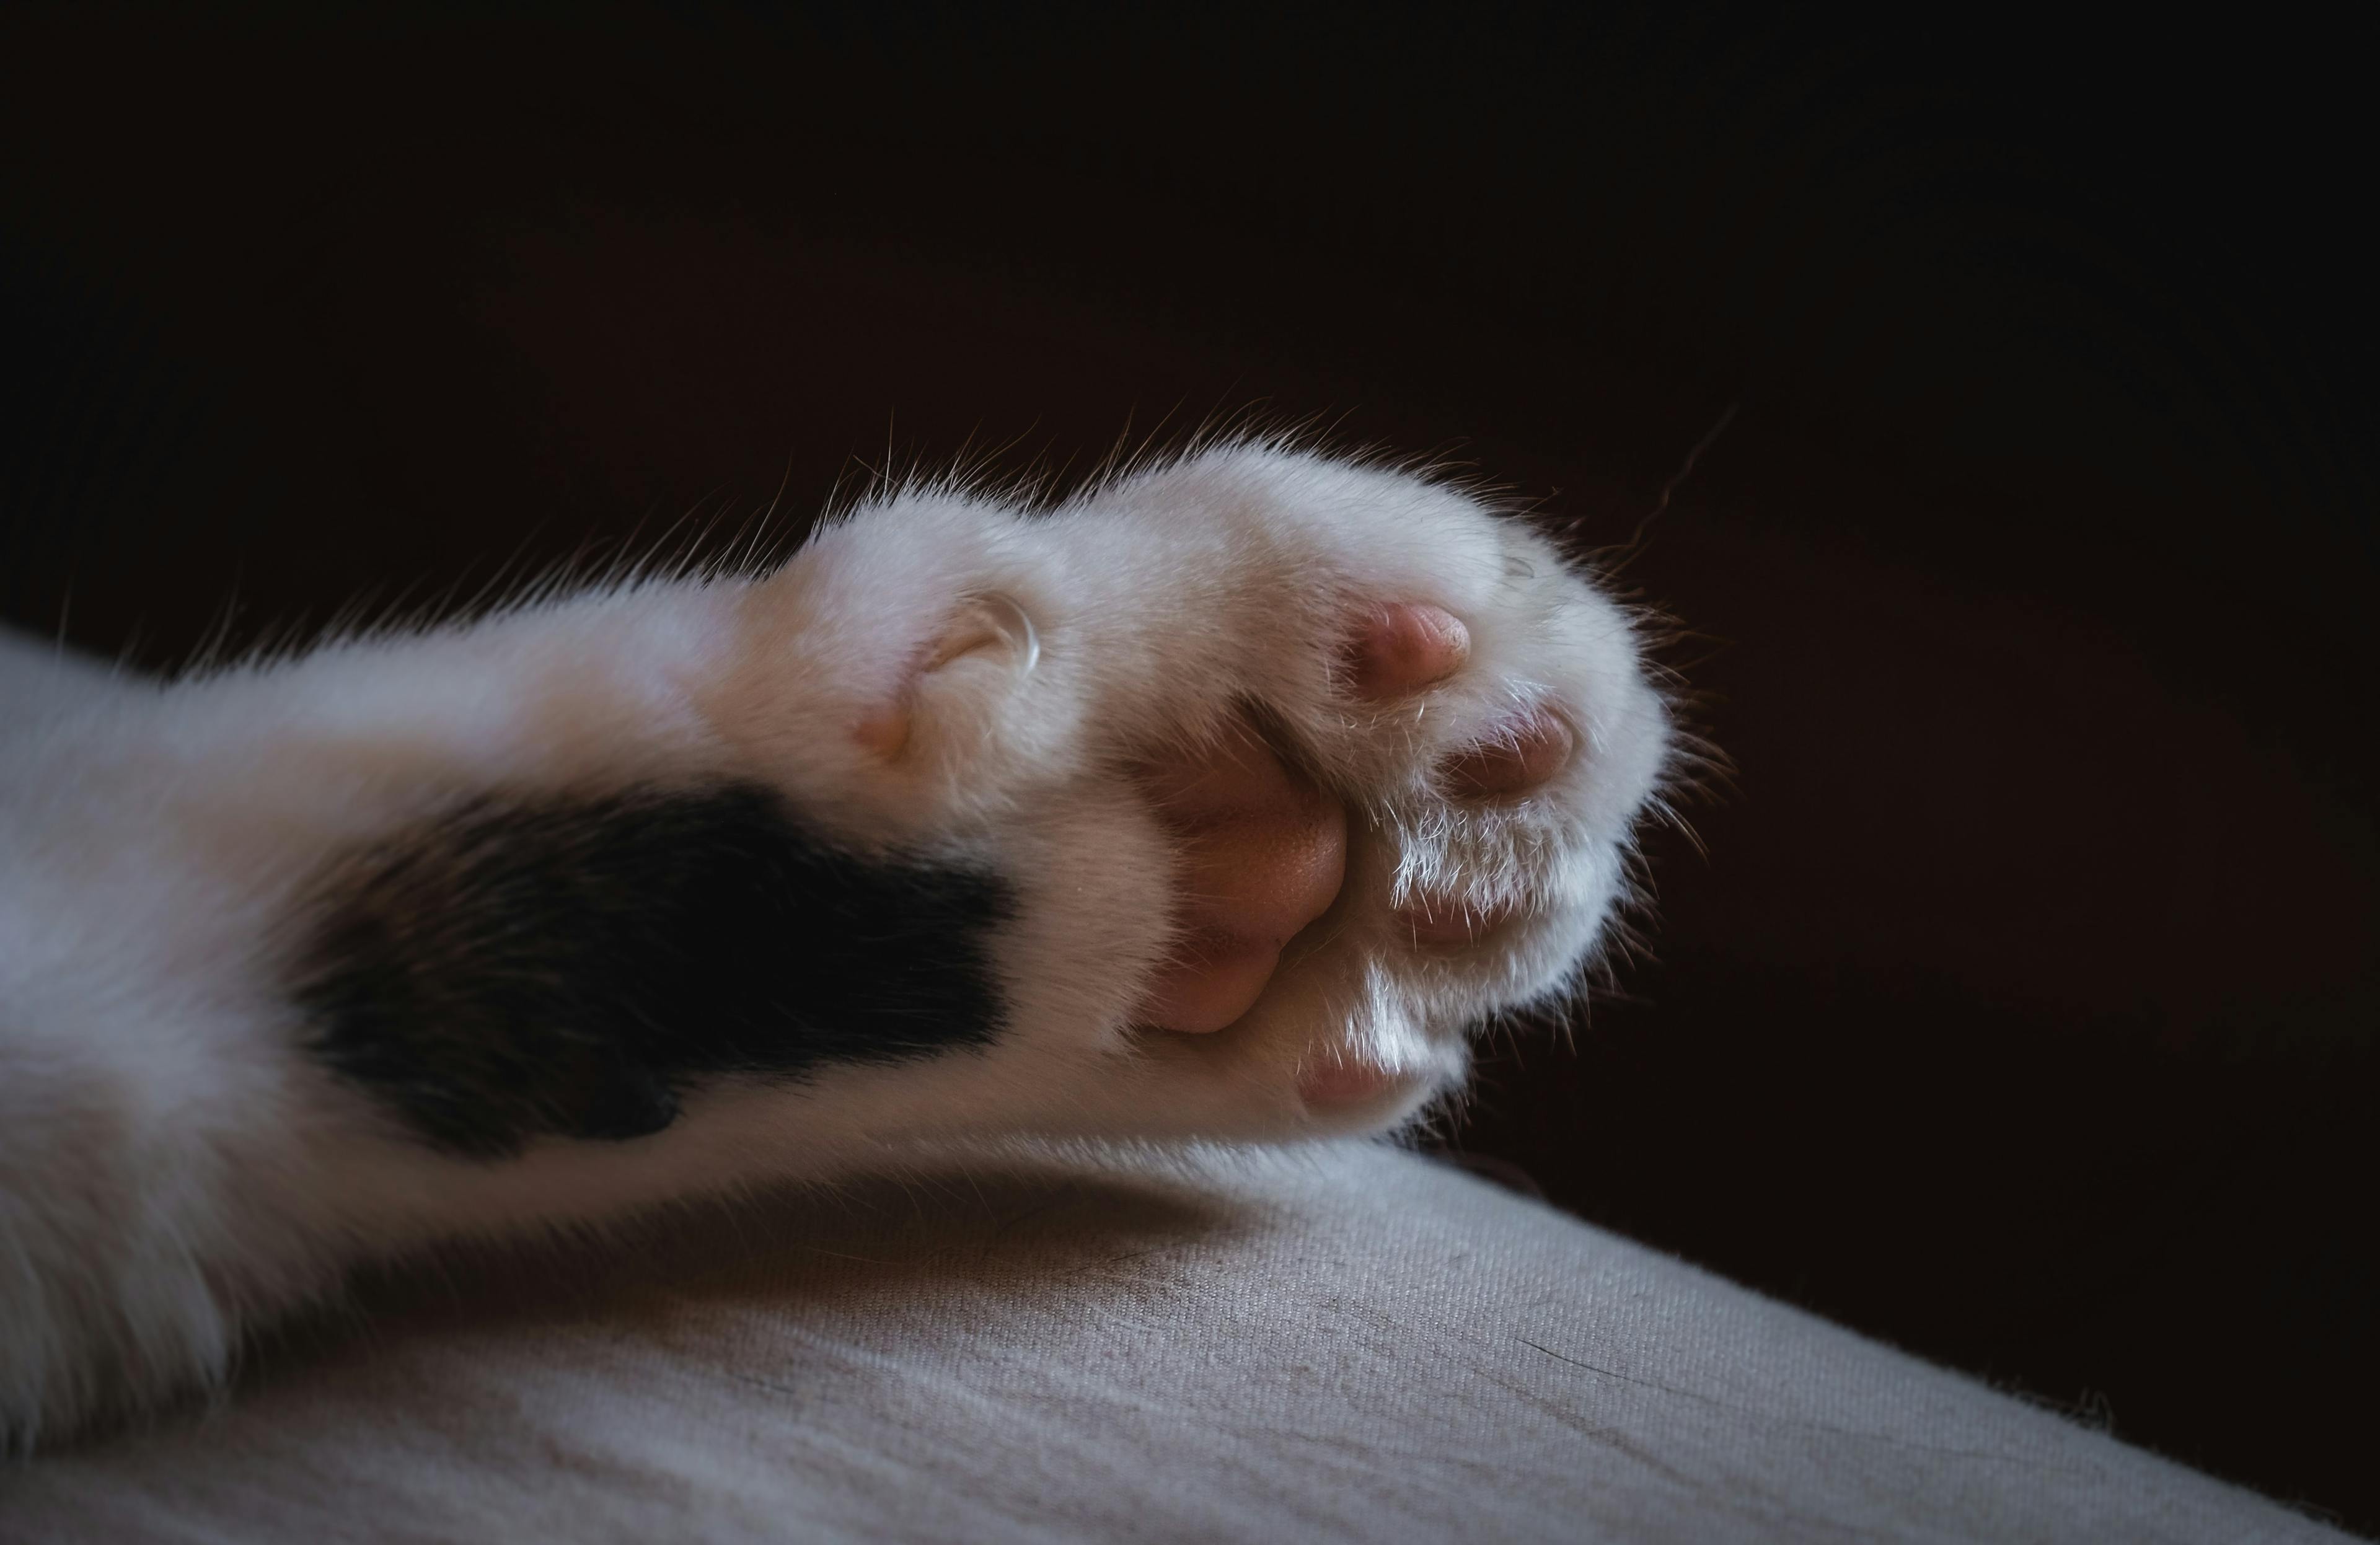 Paw of white and black cat by Francesco Ungaro